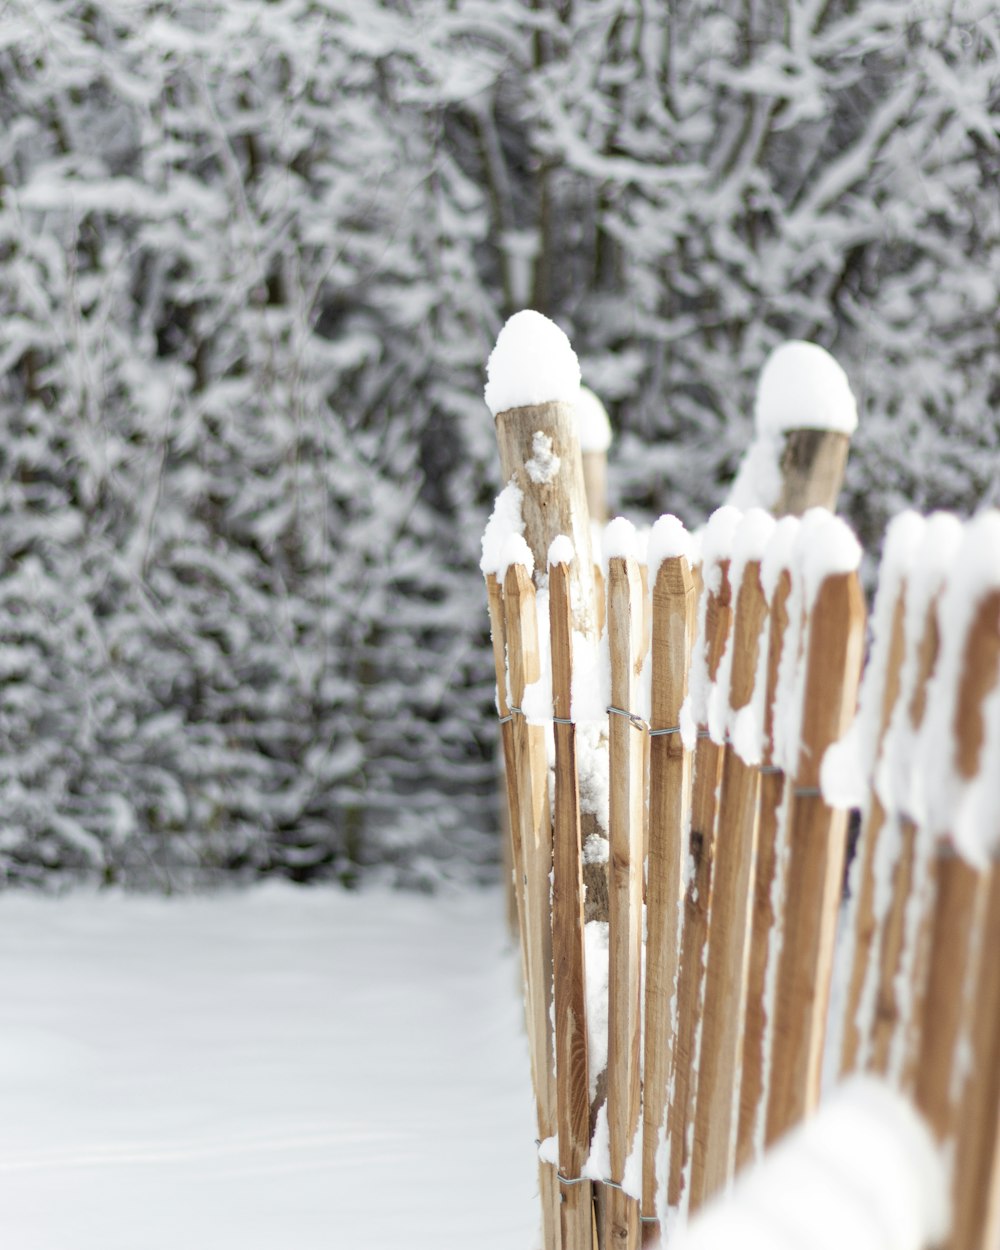 a wooden fence covered in snow next to a forest